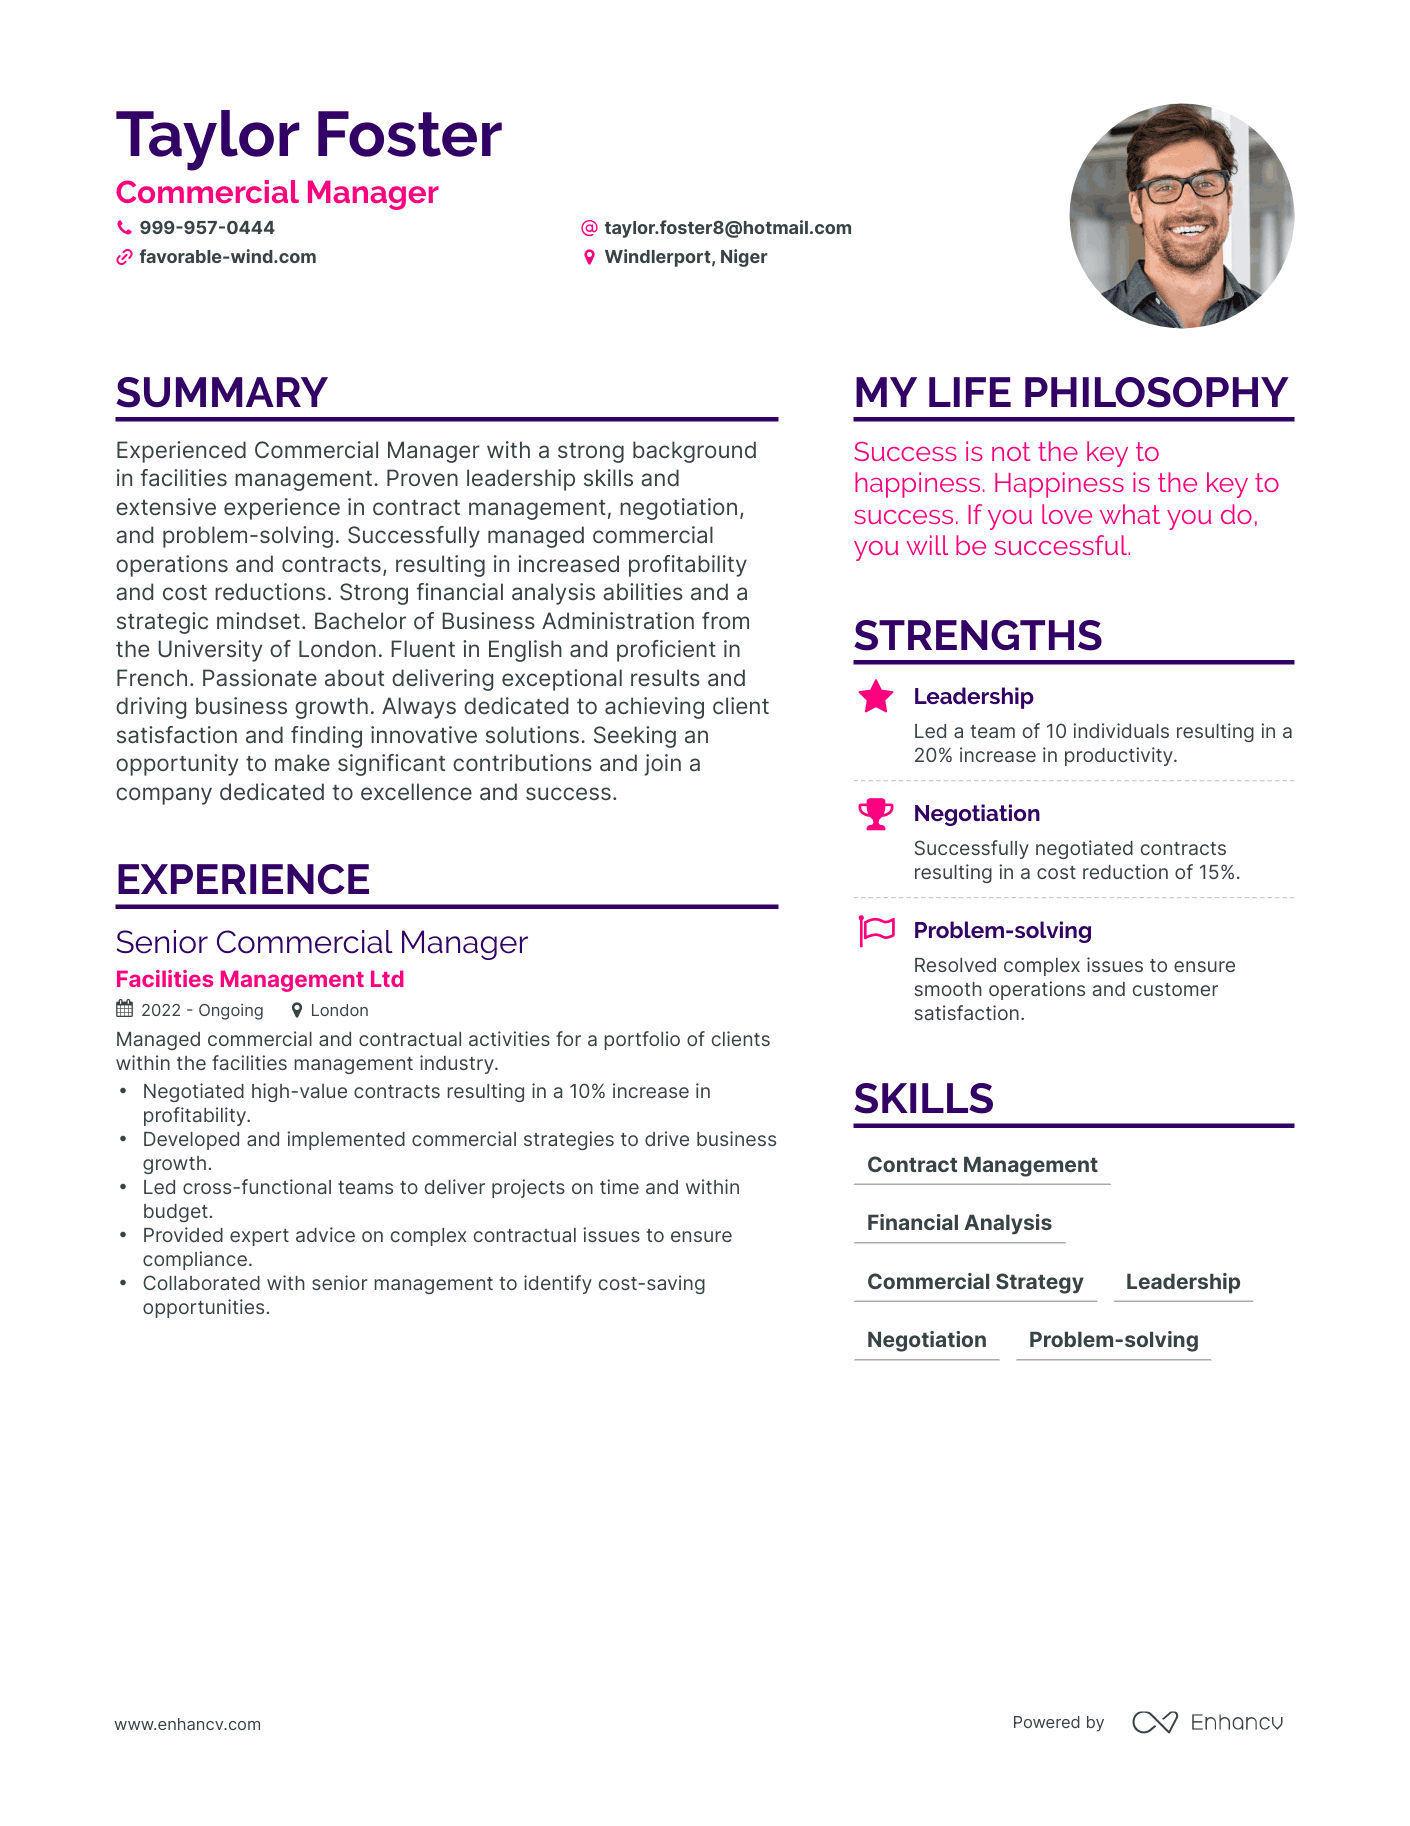 Commercial Manager resume example